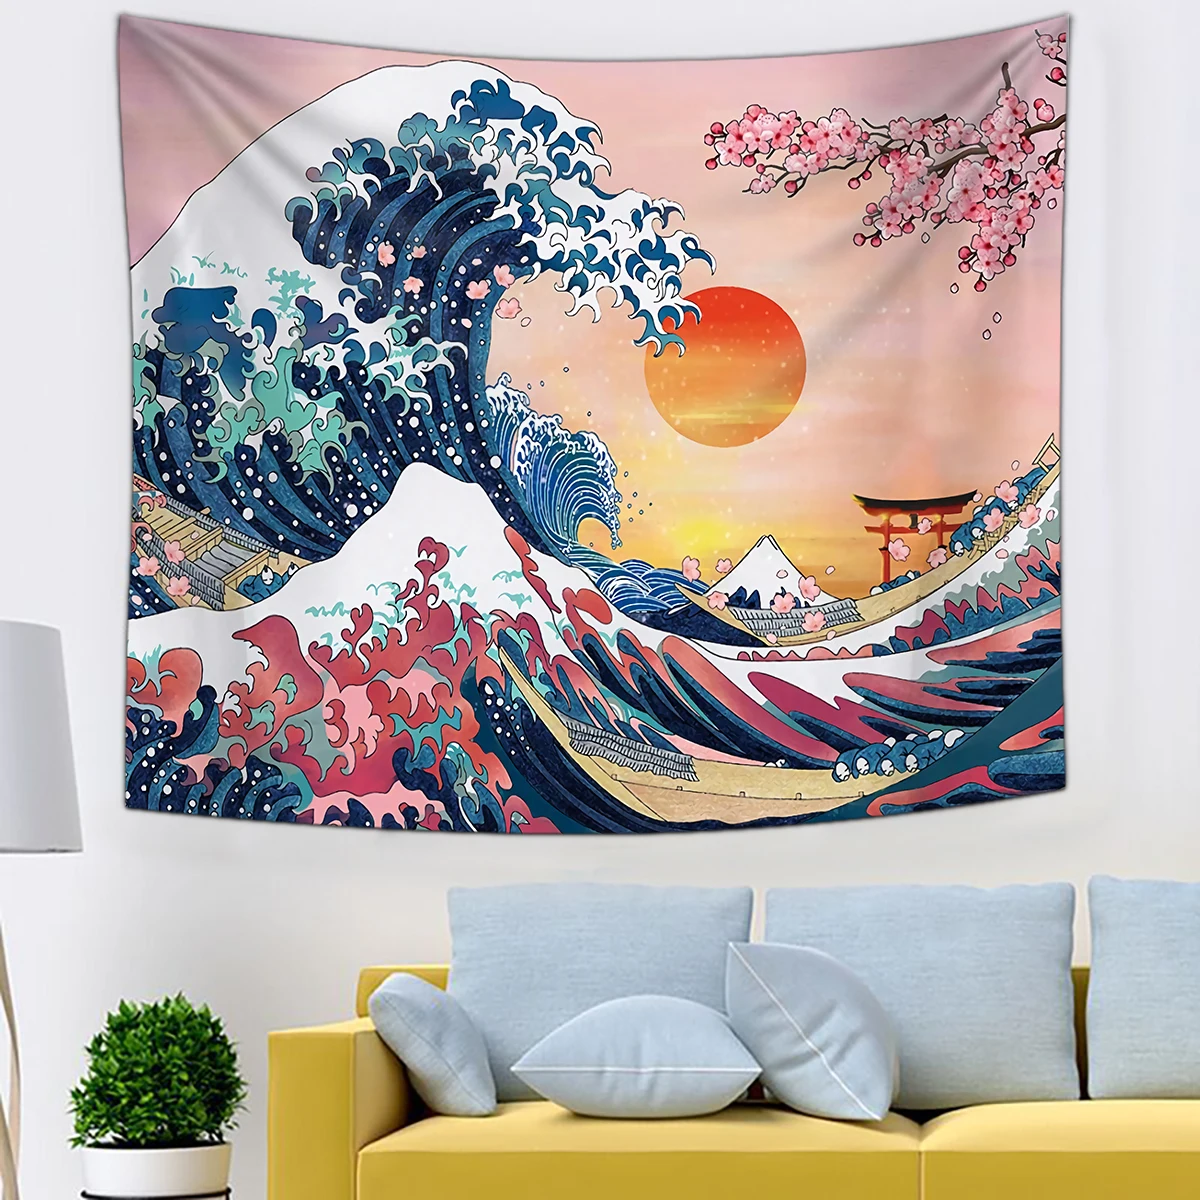 The Waves Tapestry Wall Hanging Fabrics Printed Japanese Artistic Room Decor Cherry Blossoms Sun Decorative Tapestry Wall Carpet colorful skull and floral tapestry pink wall hanging flowers printed wall carpet decorative tapestry